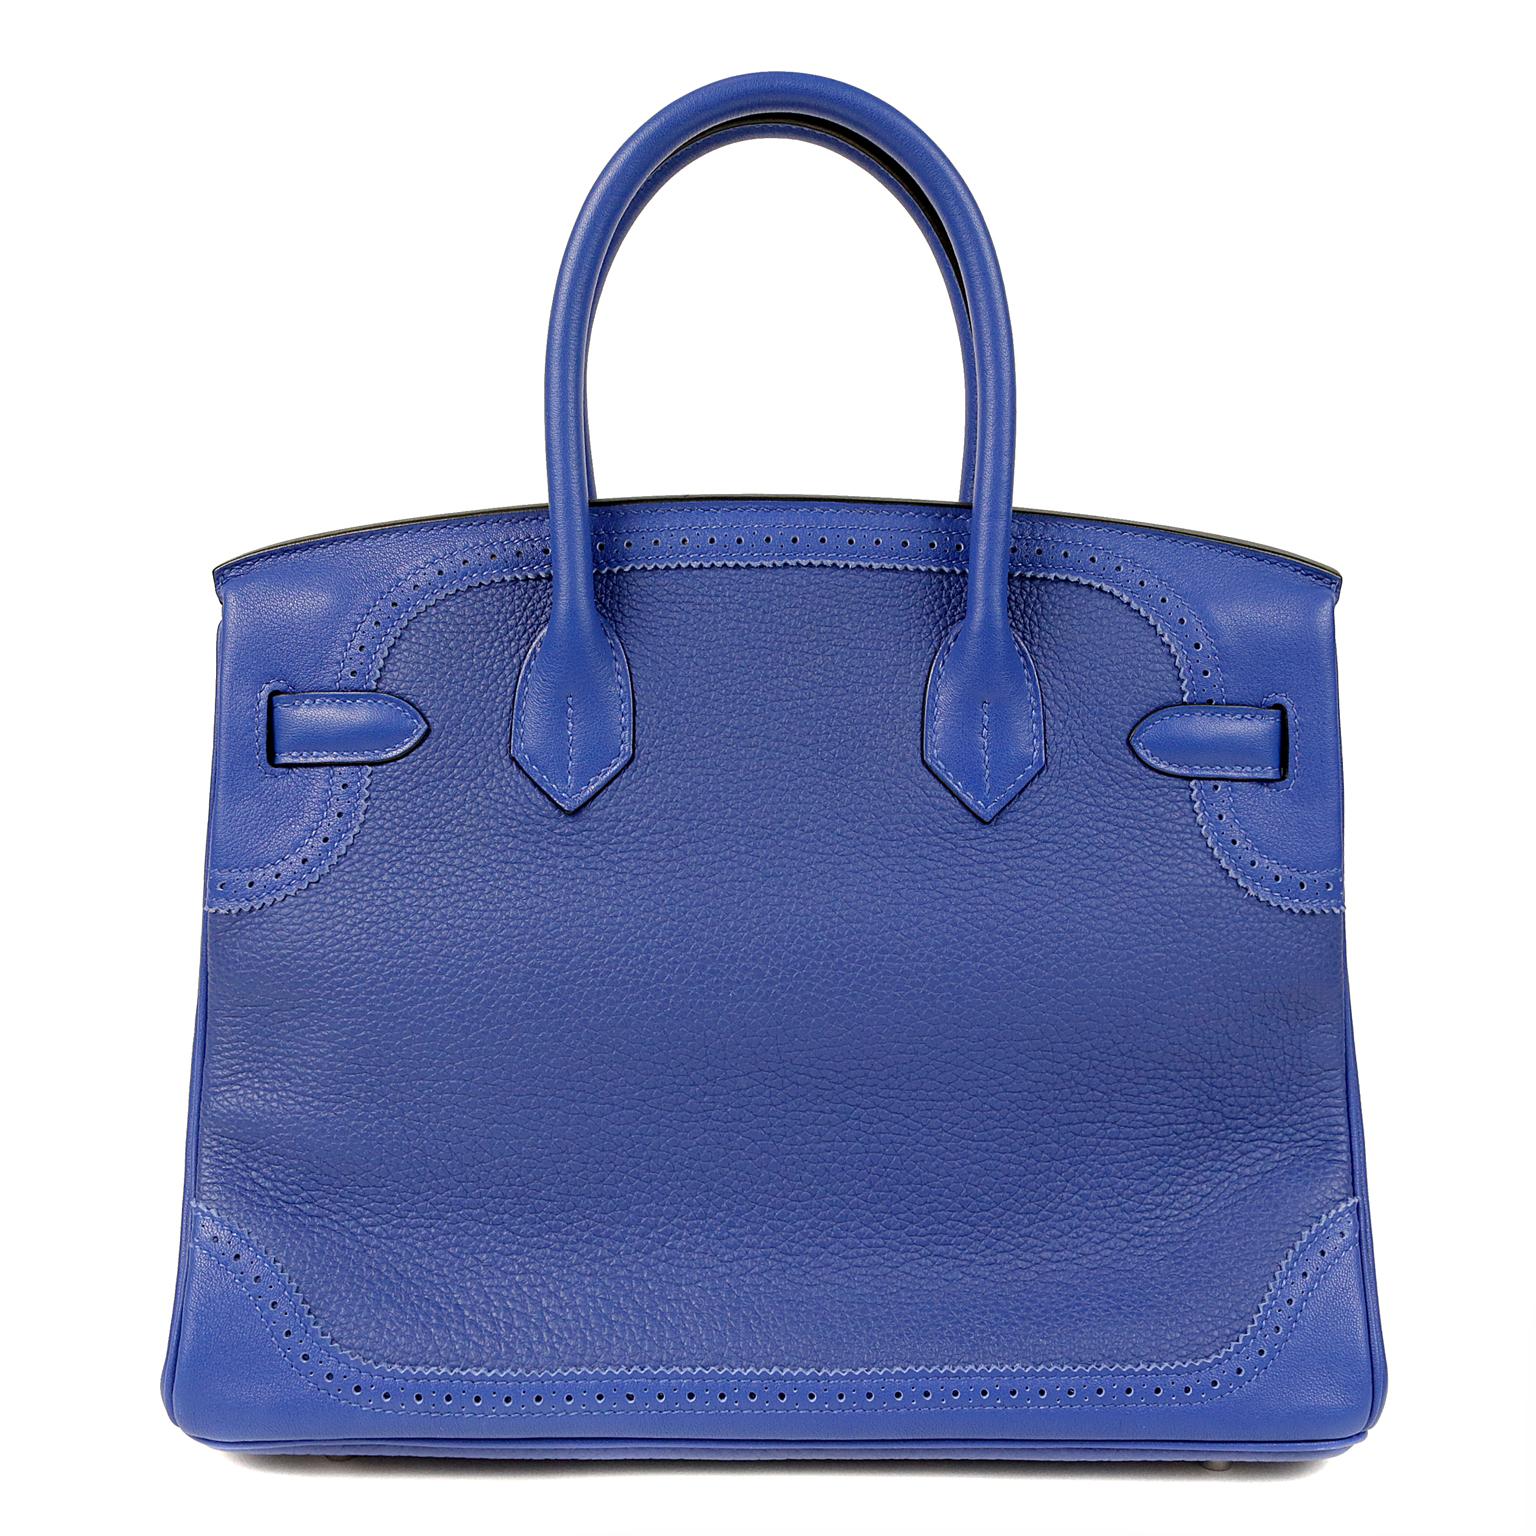 Hermès Blue Electrique Togo 30 cm Ghillies Birkin- NEW without the plastic.  Never carried.
Hermès bags are considered the ultimate luxury item the world over.  Hand stitched by skilled craftsmen, wait lists of a year or more are commonplace. 
Vivid